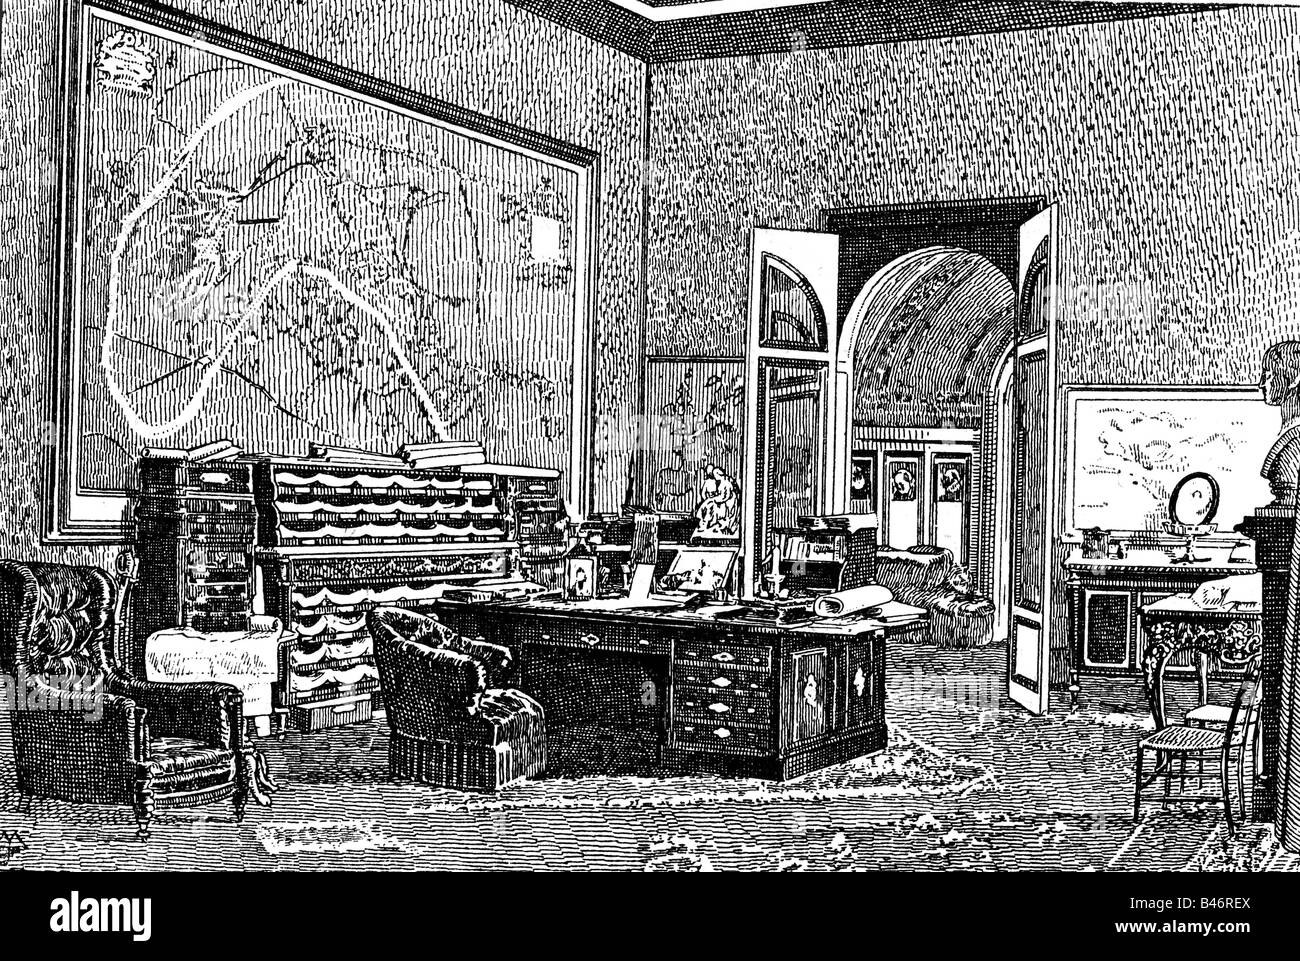 Napoleon III, 20.4.1808 - 9.1.1873, Emperor of the French 2.12.1852 - 2.9.1870, his office at the Tuileries Palace, wood engraving, 19th century, Stock Photo